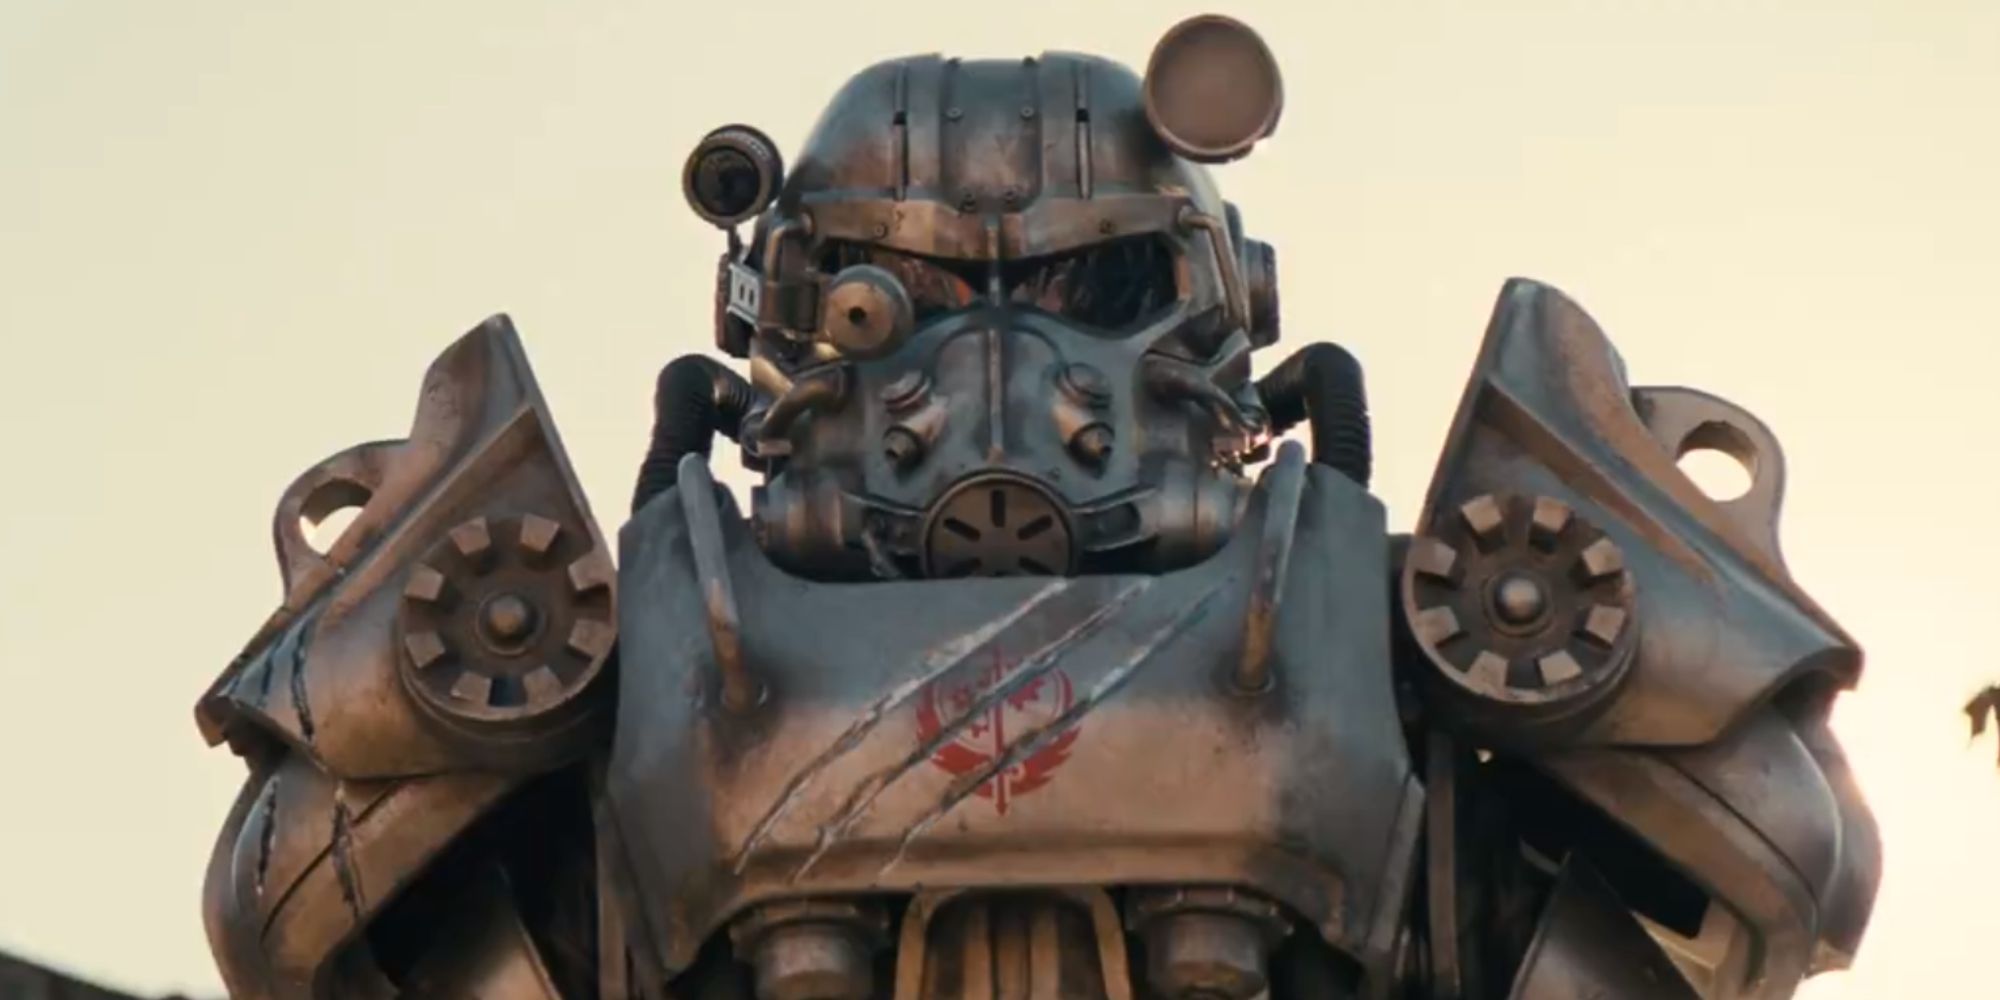 A Brotherhood of Steel soldier in Power Armour in the Fallout TV show